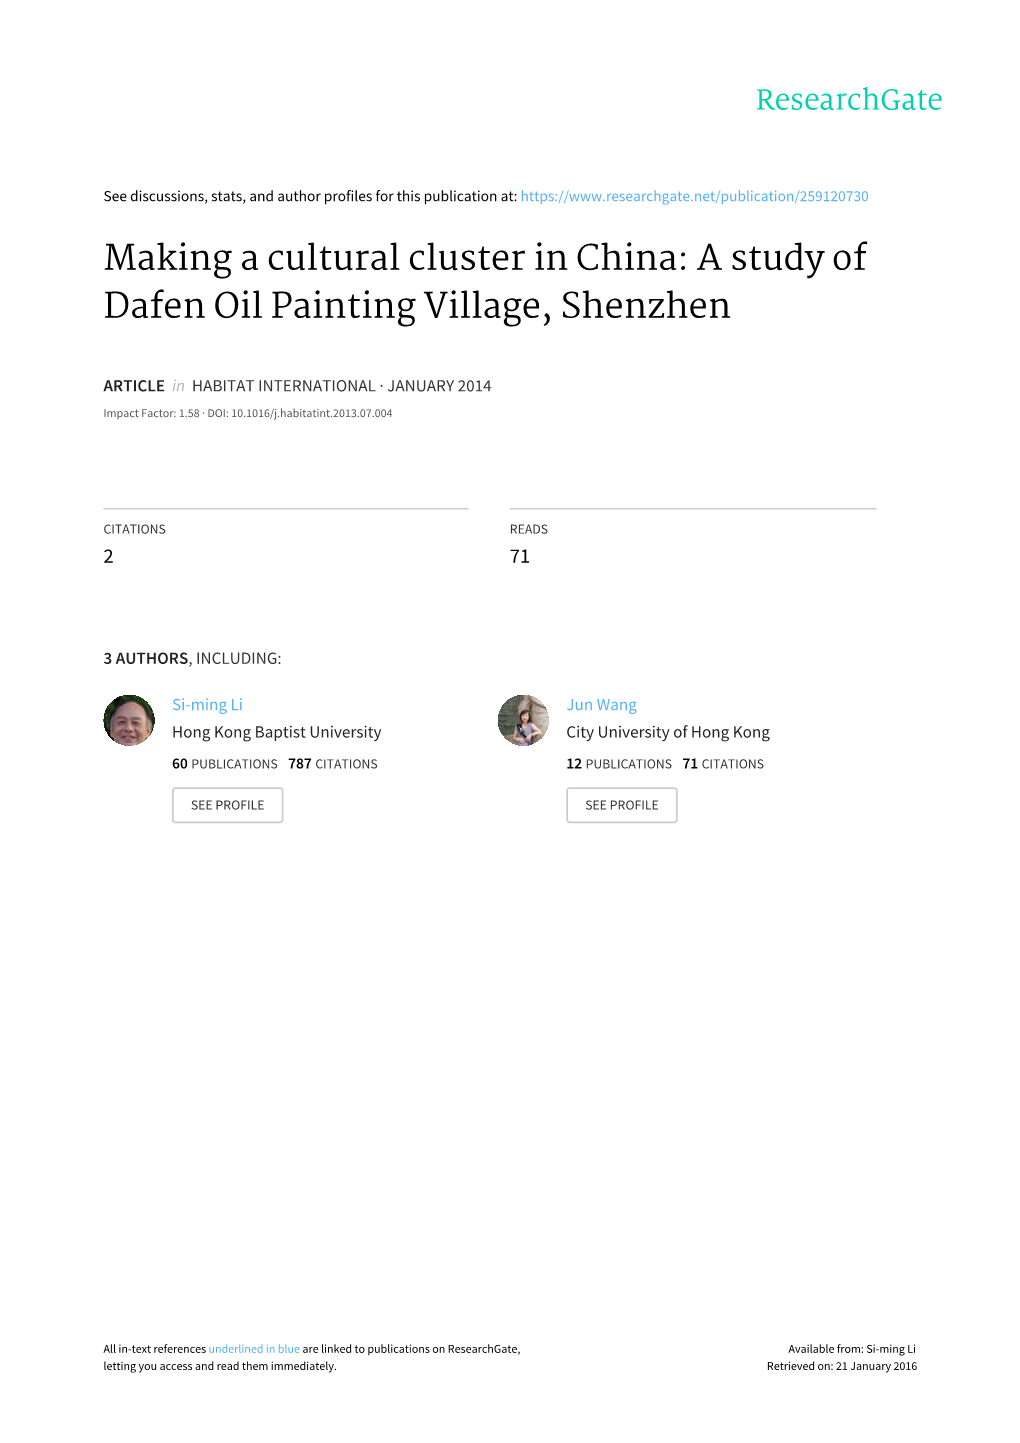 Making a Cultural Cluster in China: a Study of Dafen Oil Painting Village, Shenzhen